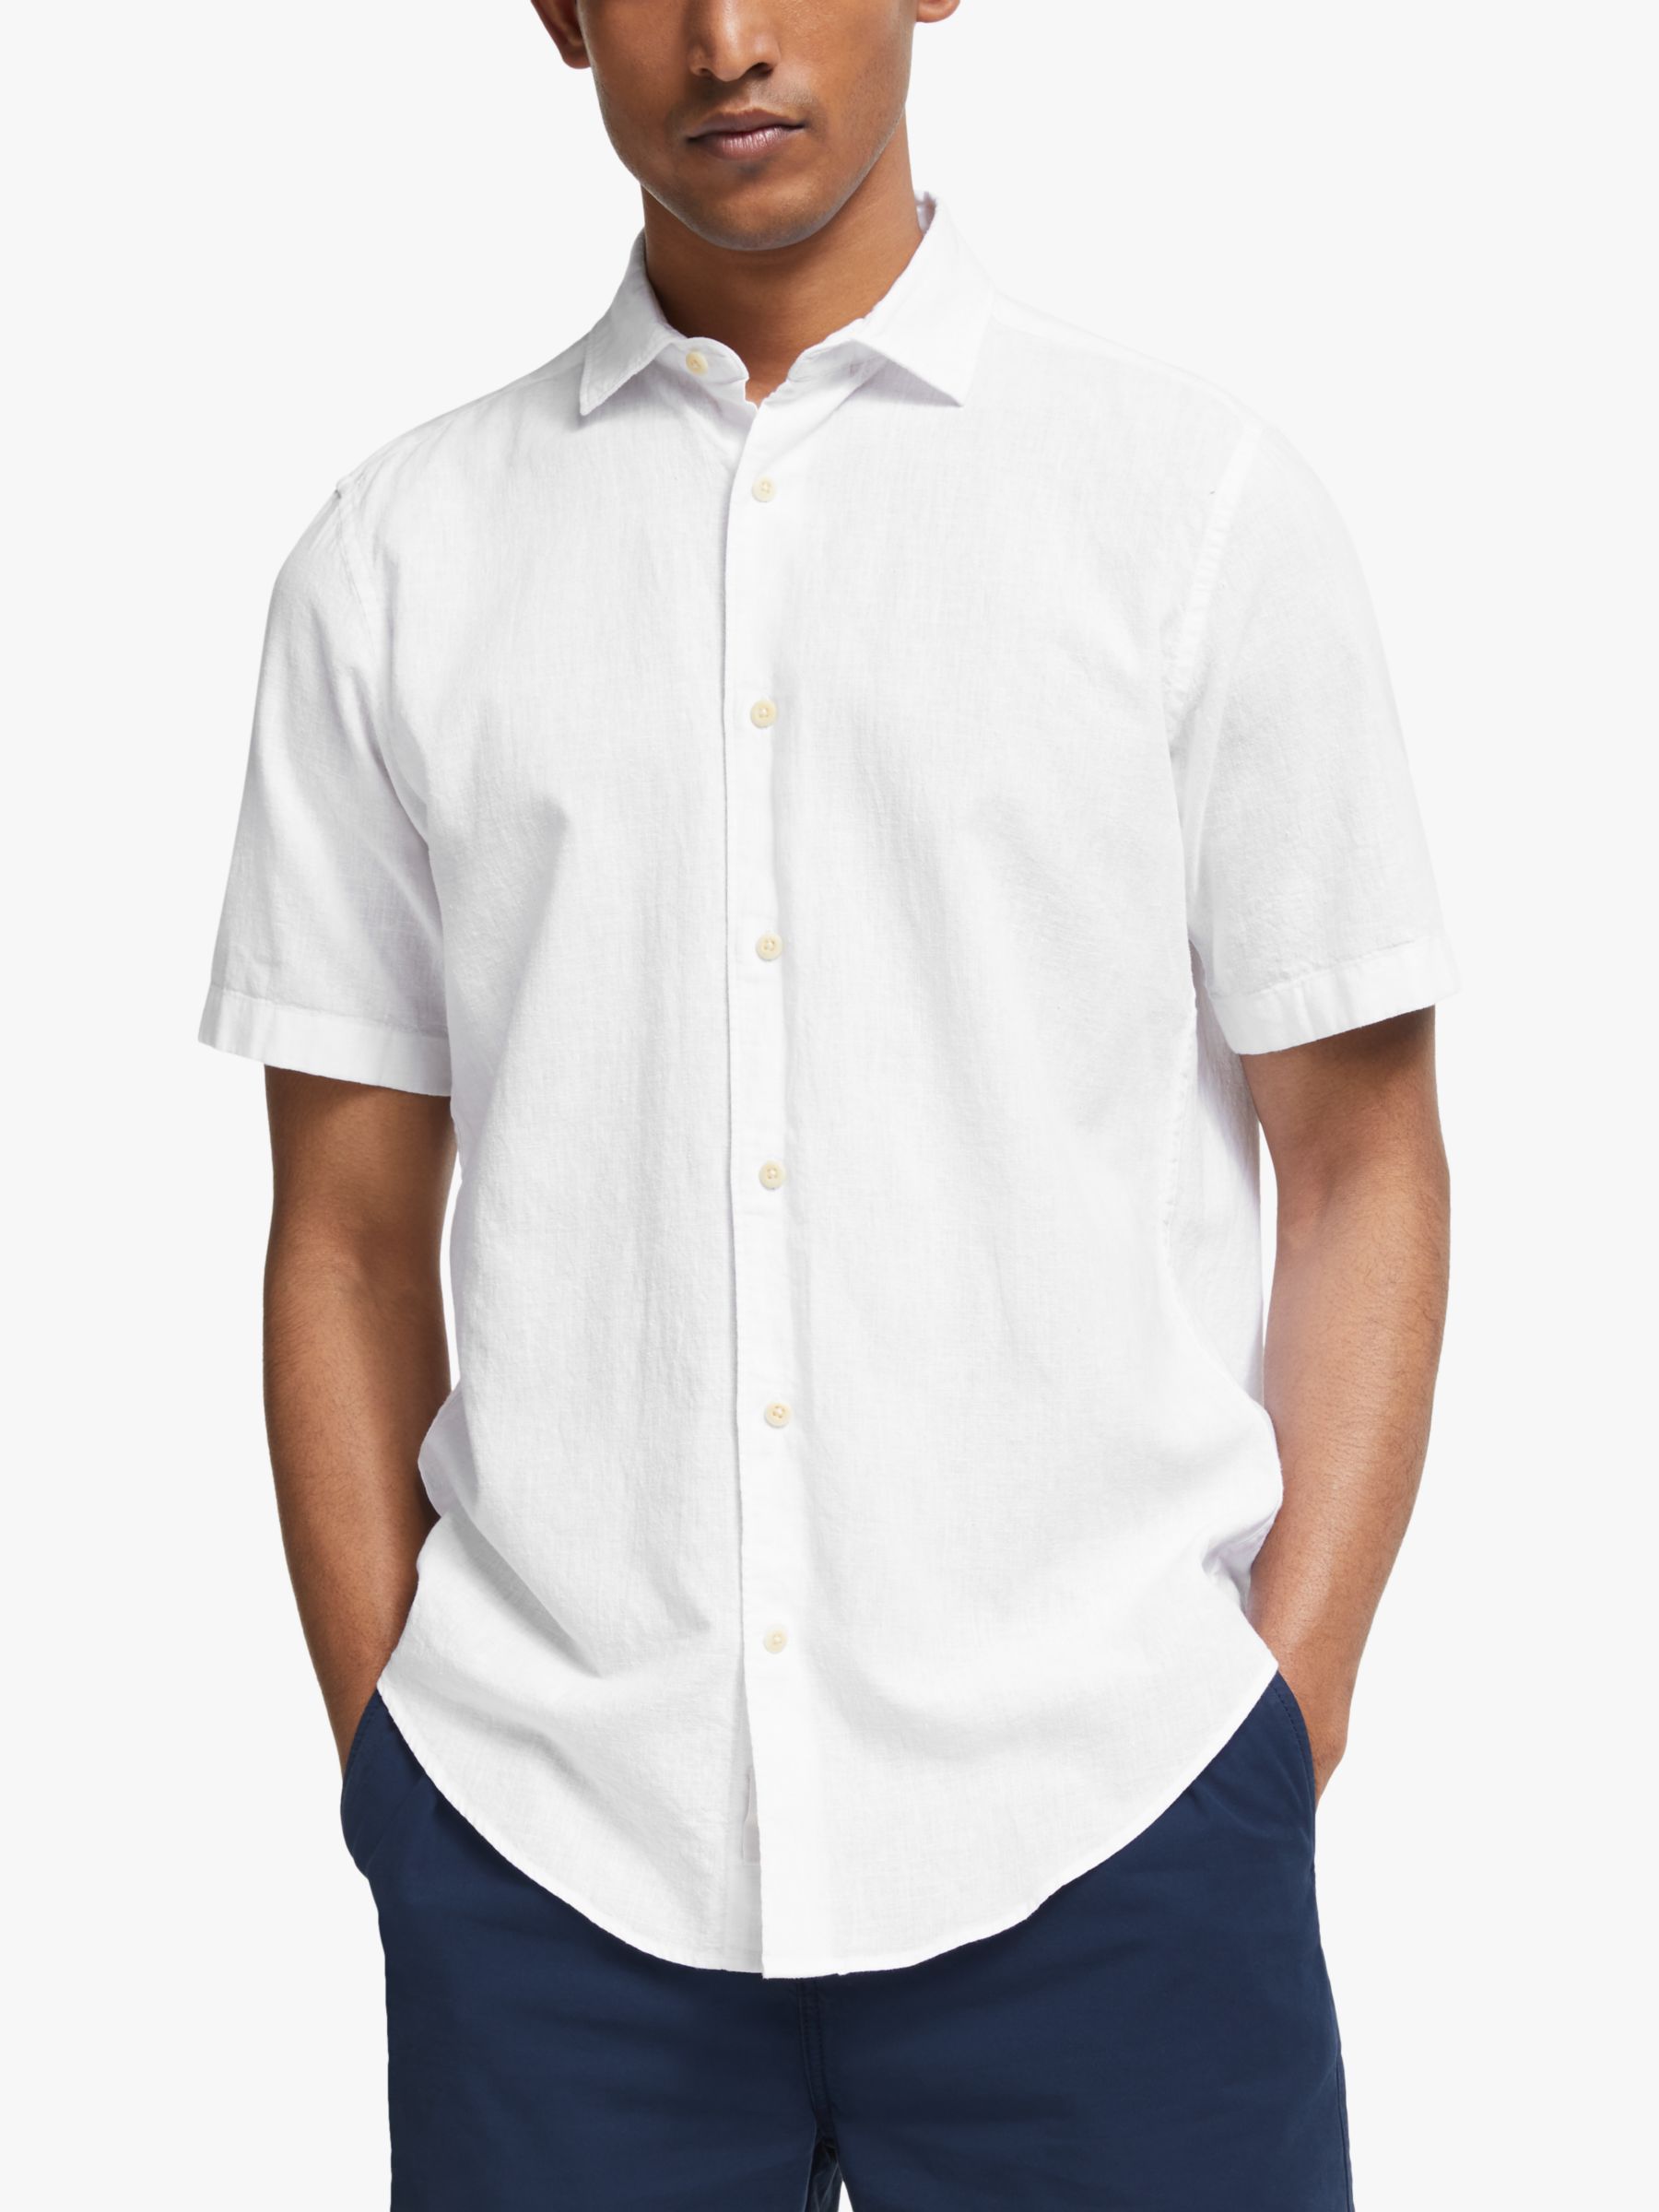 All Offers | Men's Shirts | John Lewis & Partners